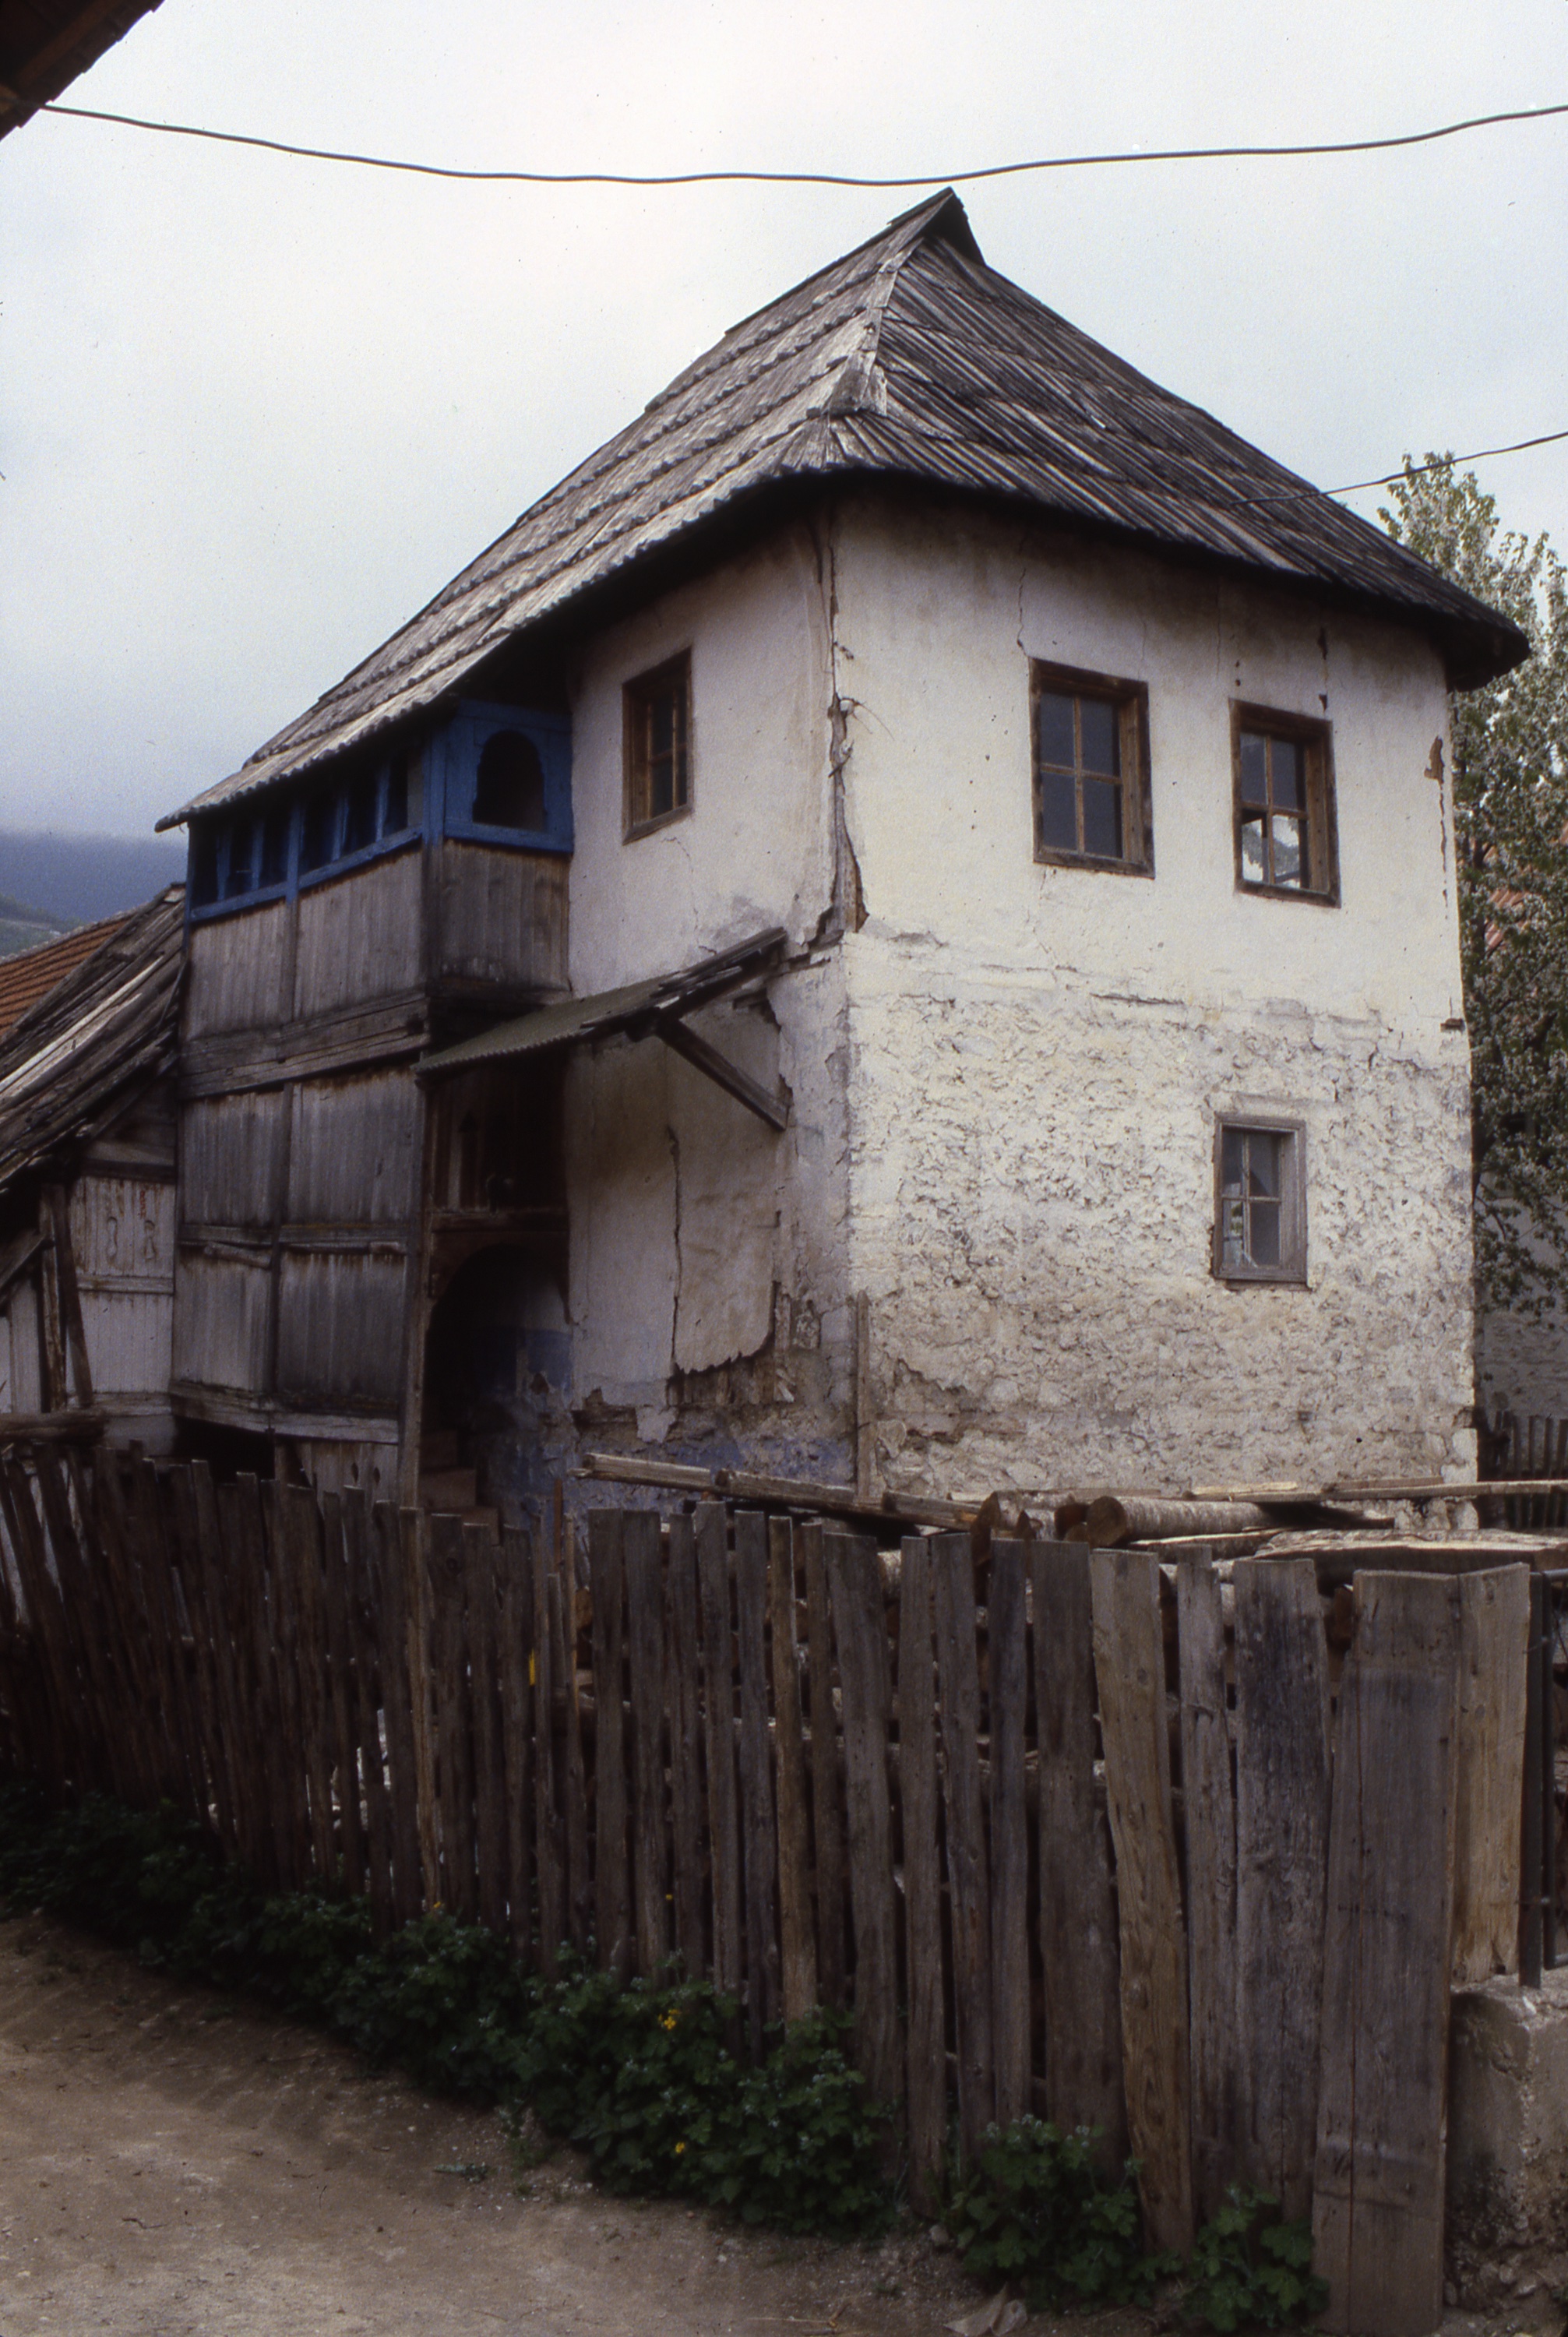 <p>This dwelling is typical of stone and wood frame construction that uses lighter infill to make exterior walls. The ground level is normally constructed above a masonry foundation used as a root cellar. Upper walls are constructed using lumber studs and areas between are filled with woven branches (wattle) and clay daub or soft brickwork. An exterior plaster coat was applied to seal the surfaces. The wood-enclosed stairs lead to the main living levels and gallery. One can see that the wood studs are notched to lock the finish surface to the wood frame. The wooden hipped roof is typical in the region.&nbsp;</p>